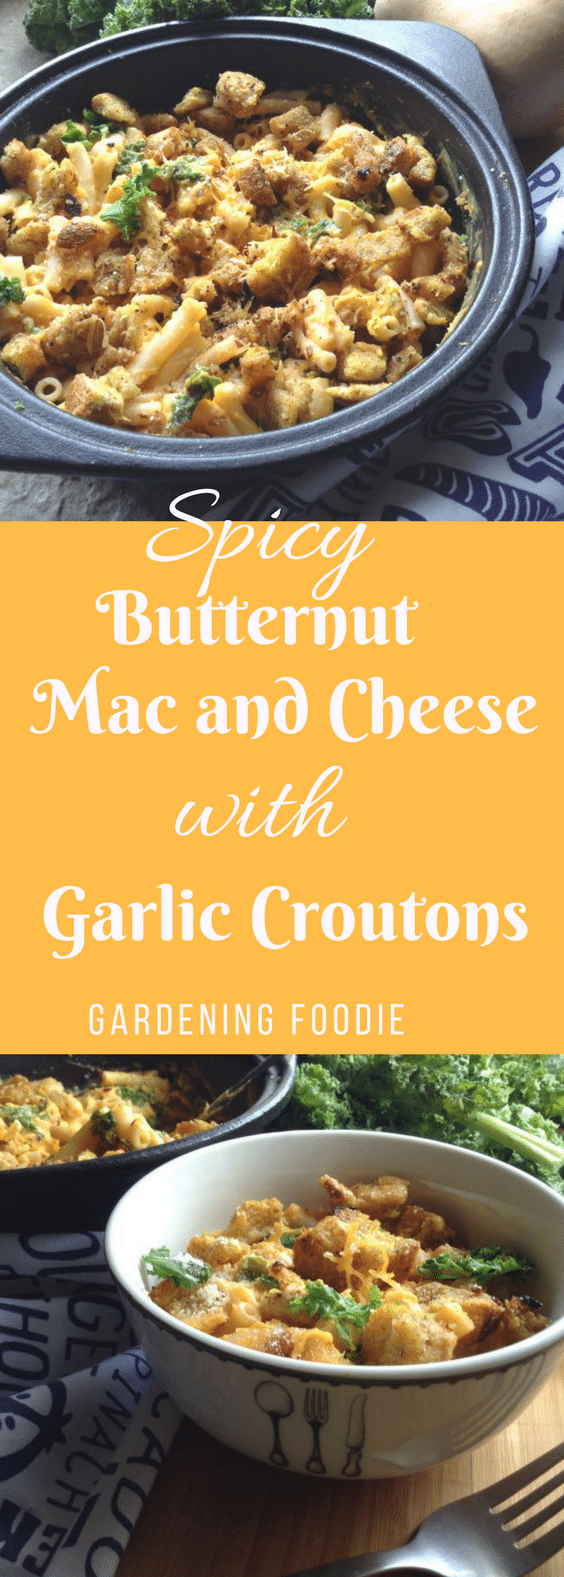 SPICY BUTTERNUT MAC AND CHEESE WITH GARLIC CROUTONS